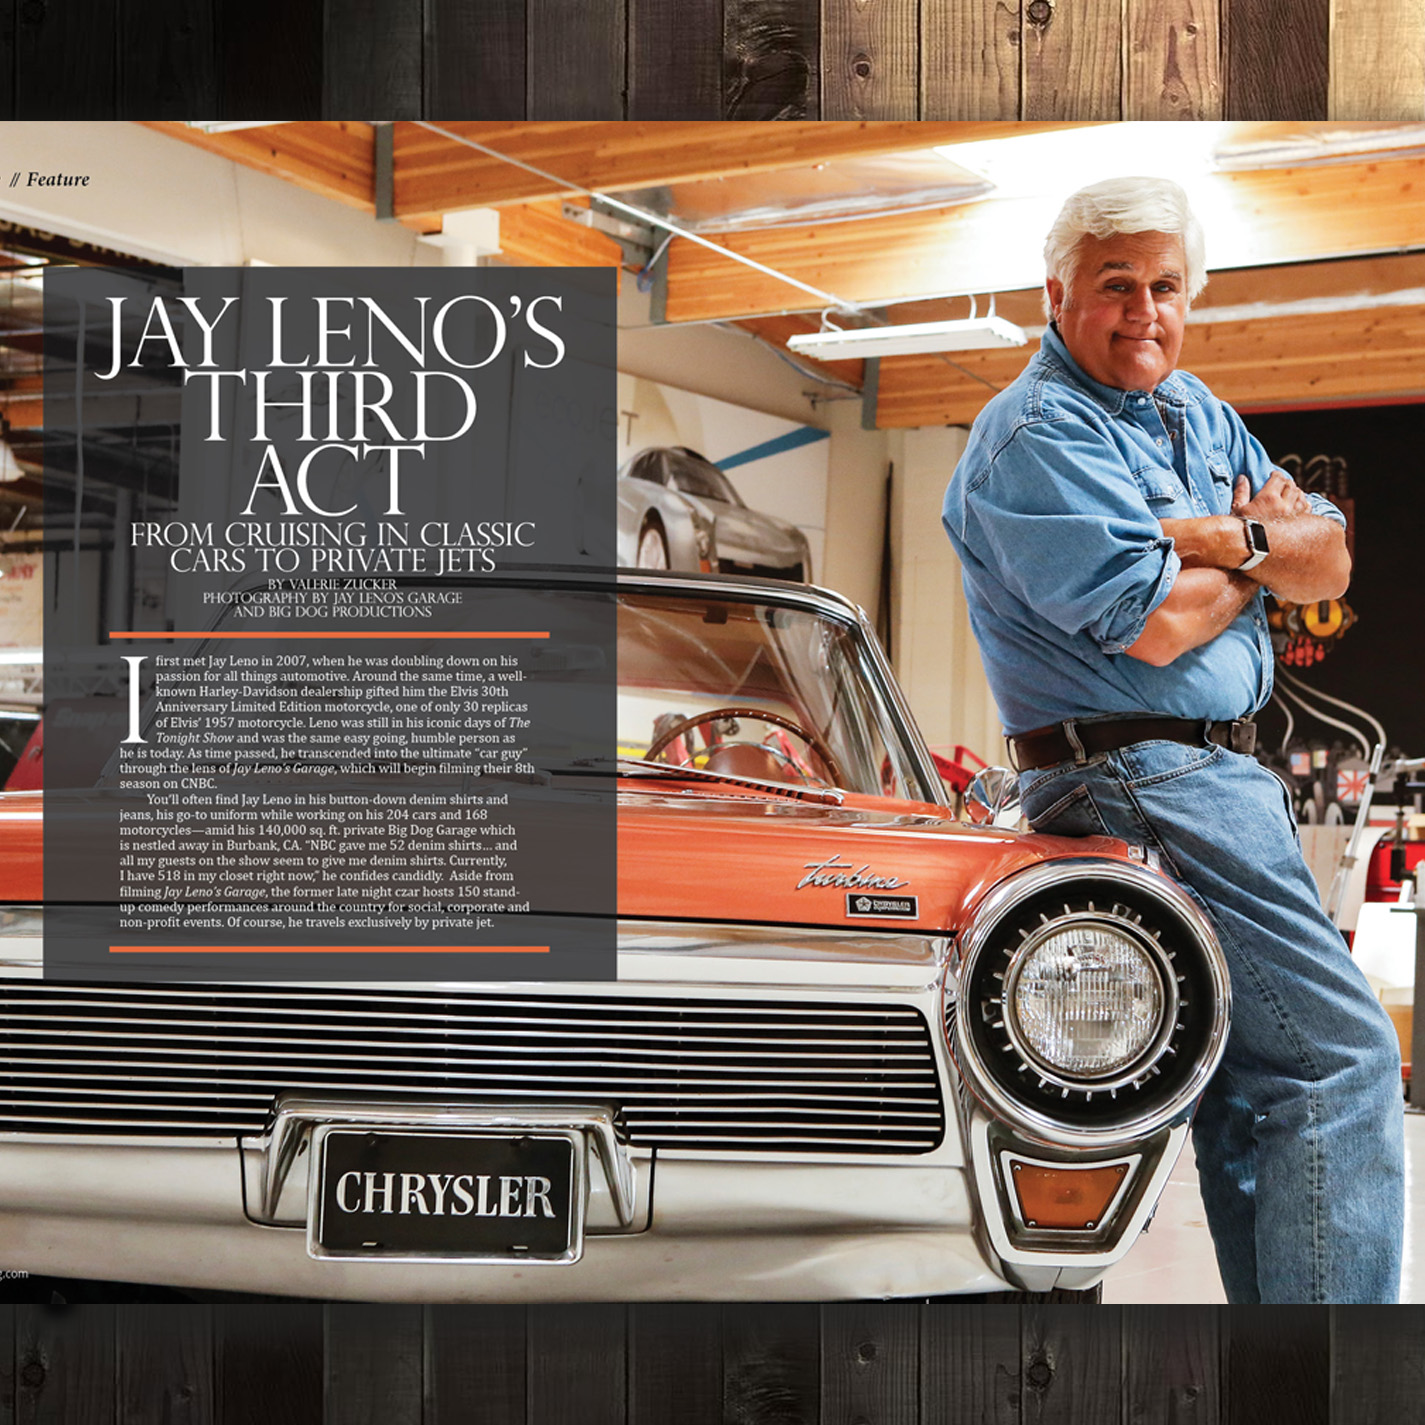 Jay Leno's Garage Advanced Vehicle Care Discount Offer - Shannons Club